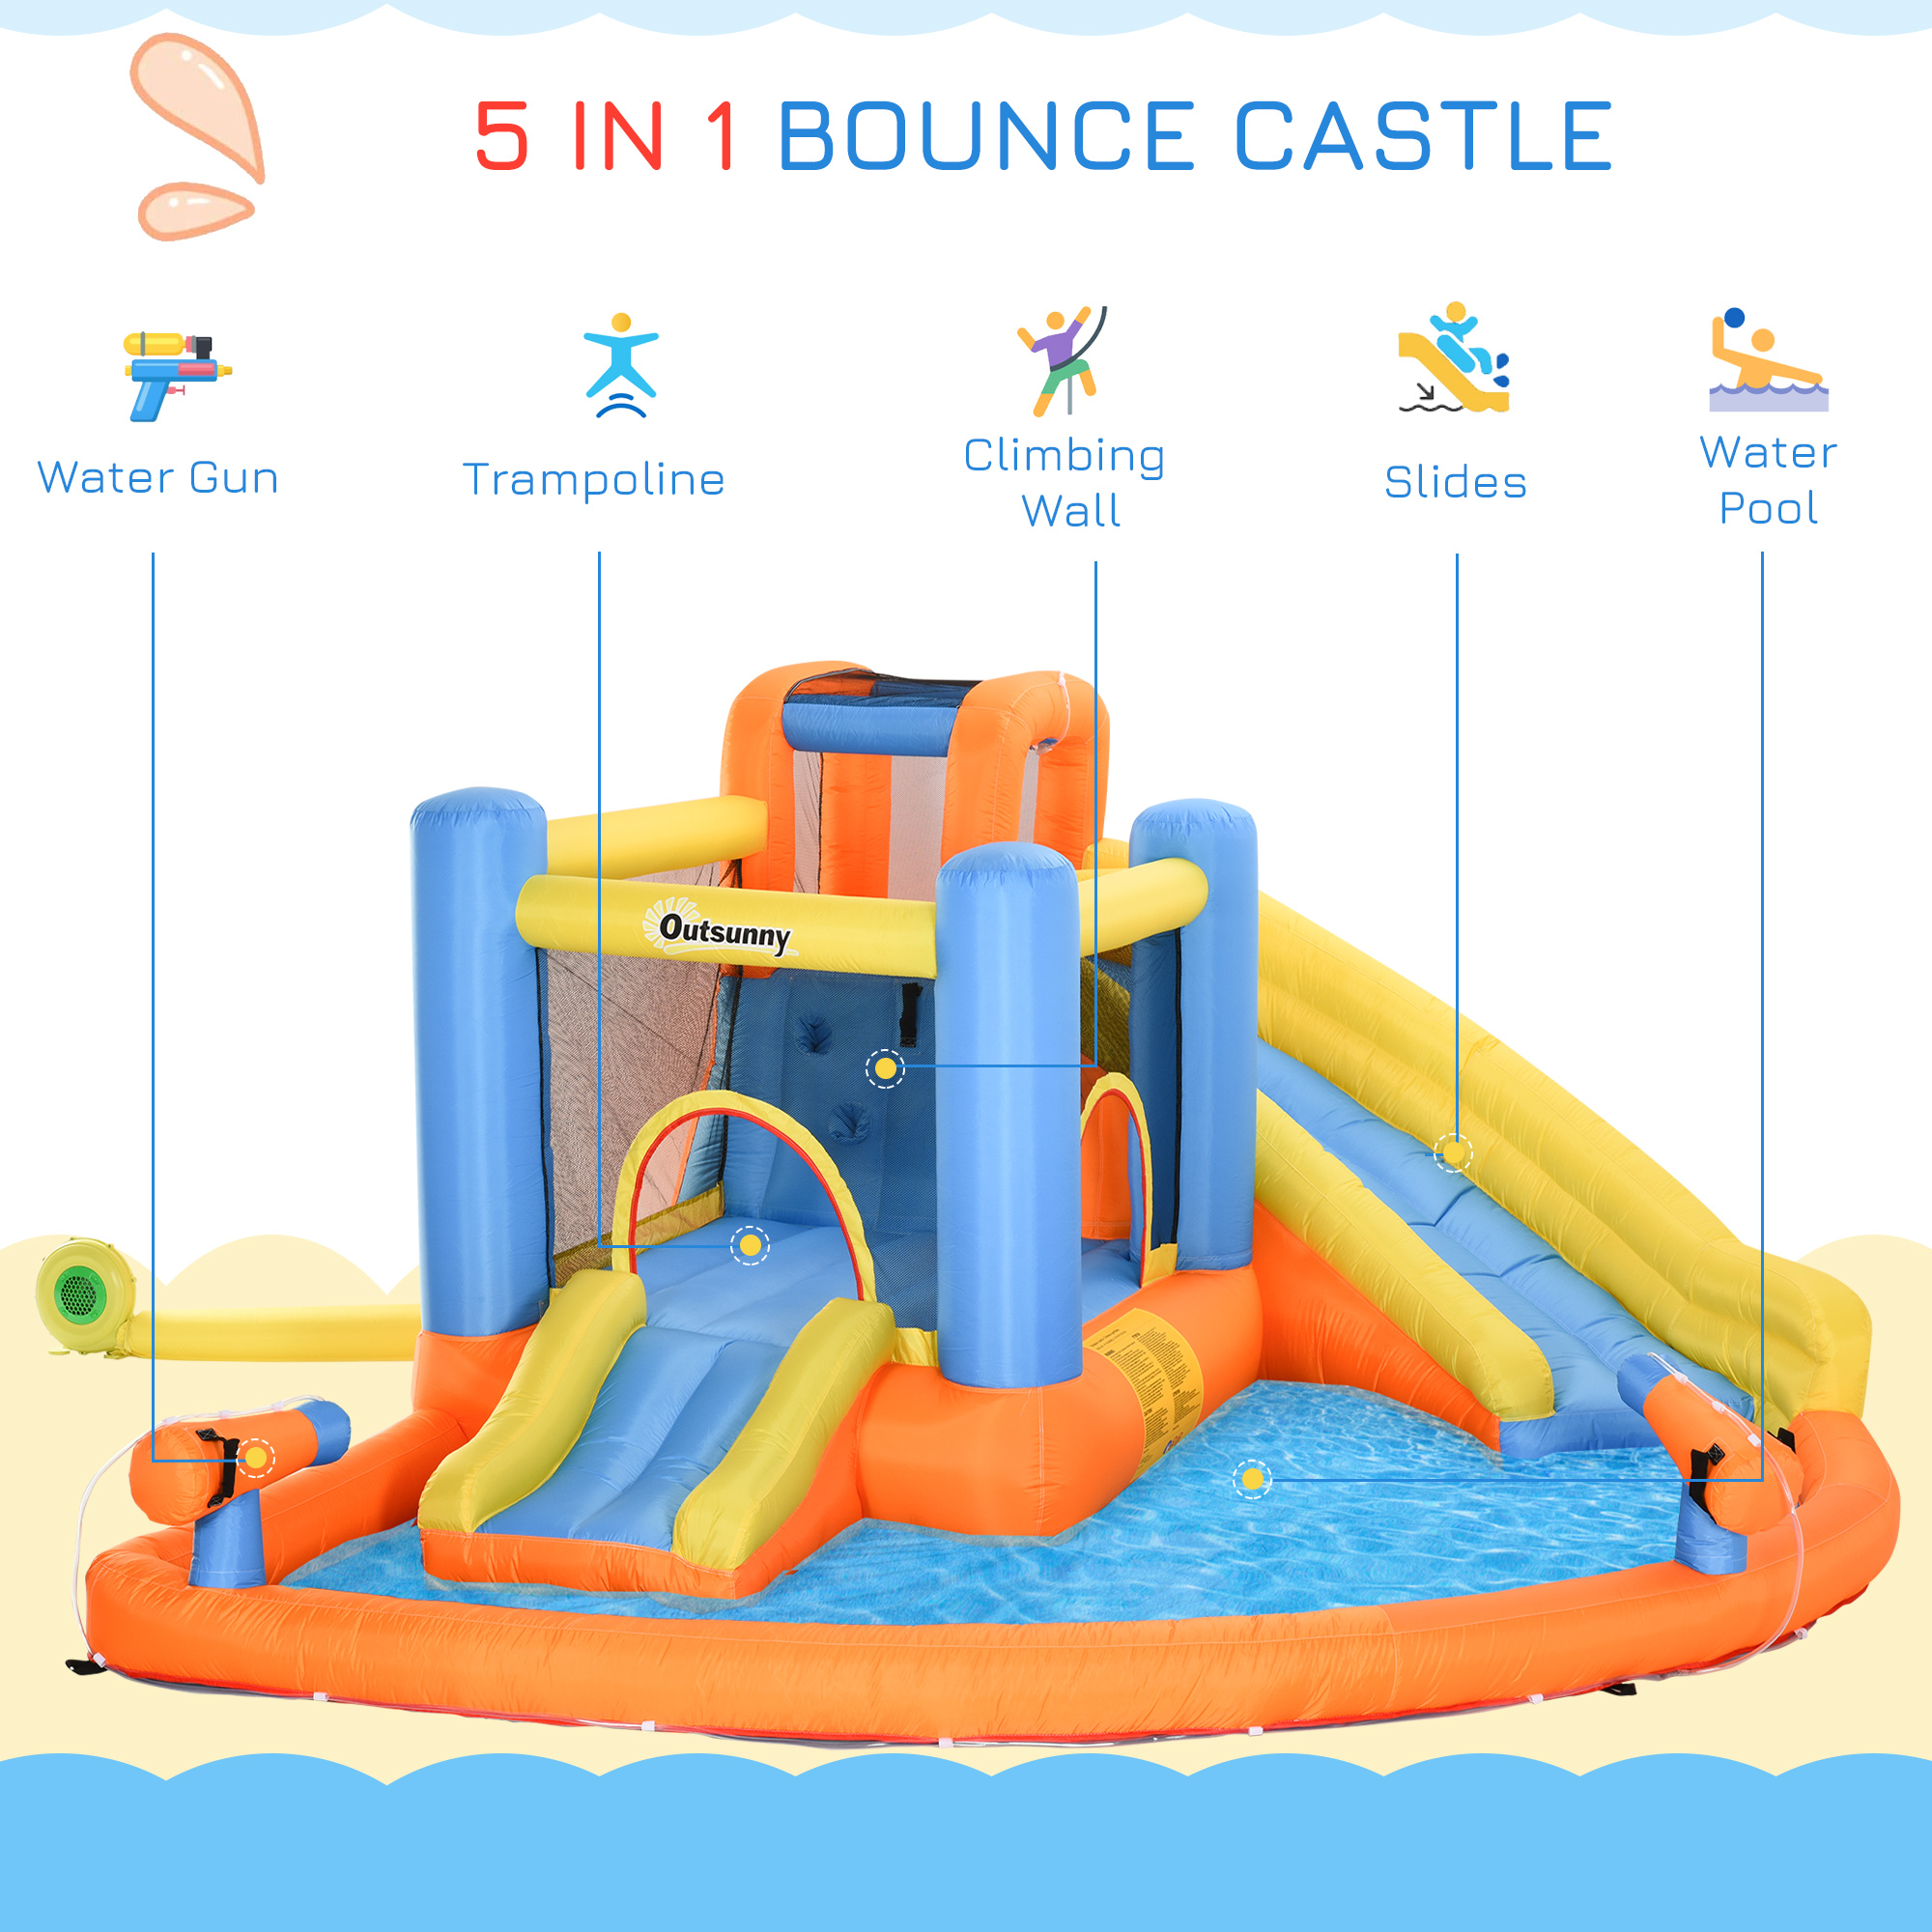 Outsunny Kids Inflatable Water Slide 5-in-1 Bounce House Water Park Jumping Castle with Water Pool, Slide, Climbing Walls, & 2 Water Cannons, 450W Air Blower - image 3 of 9